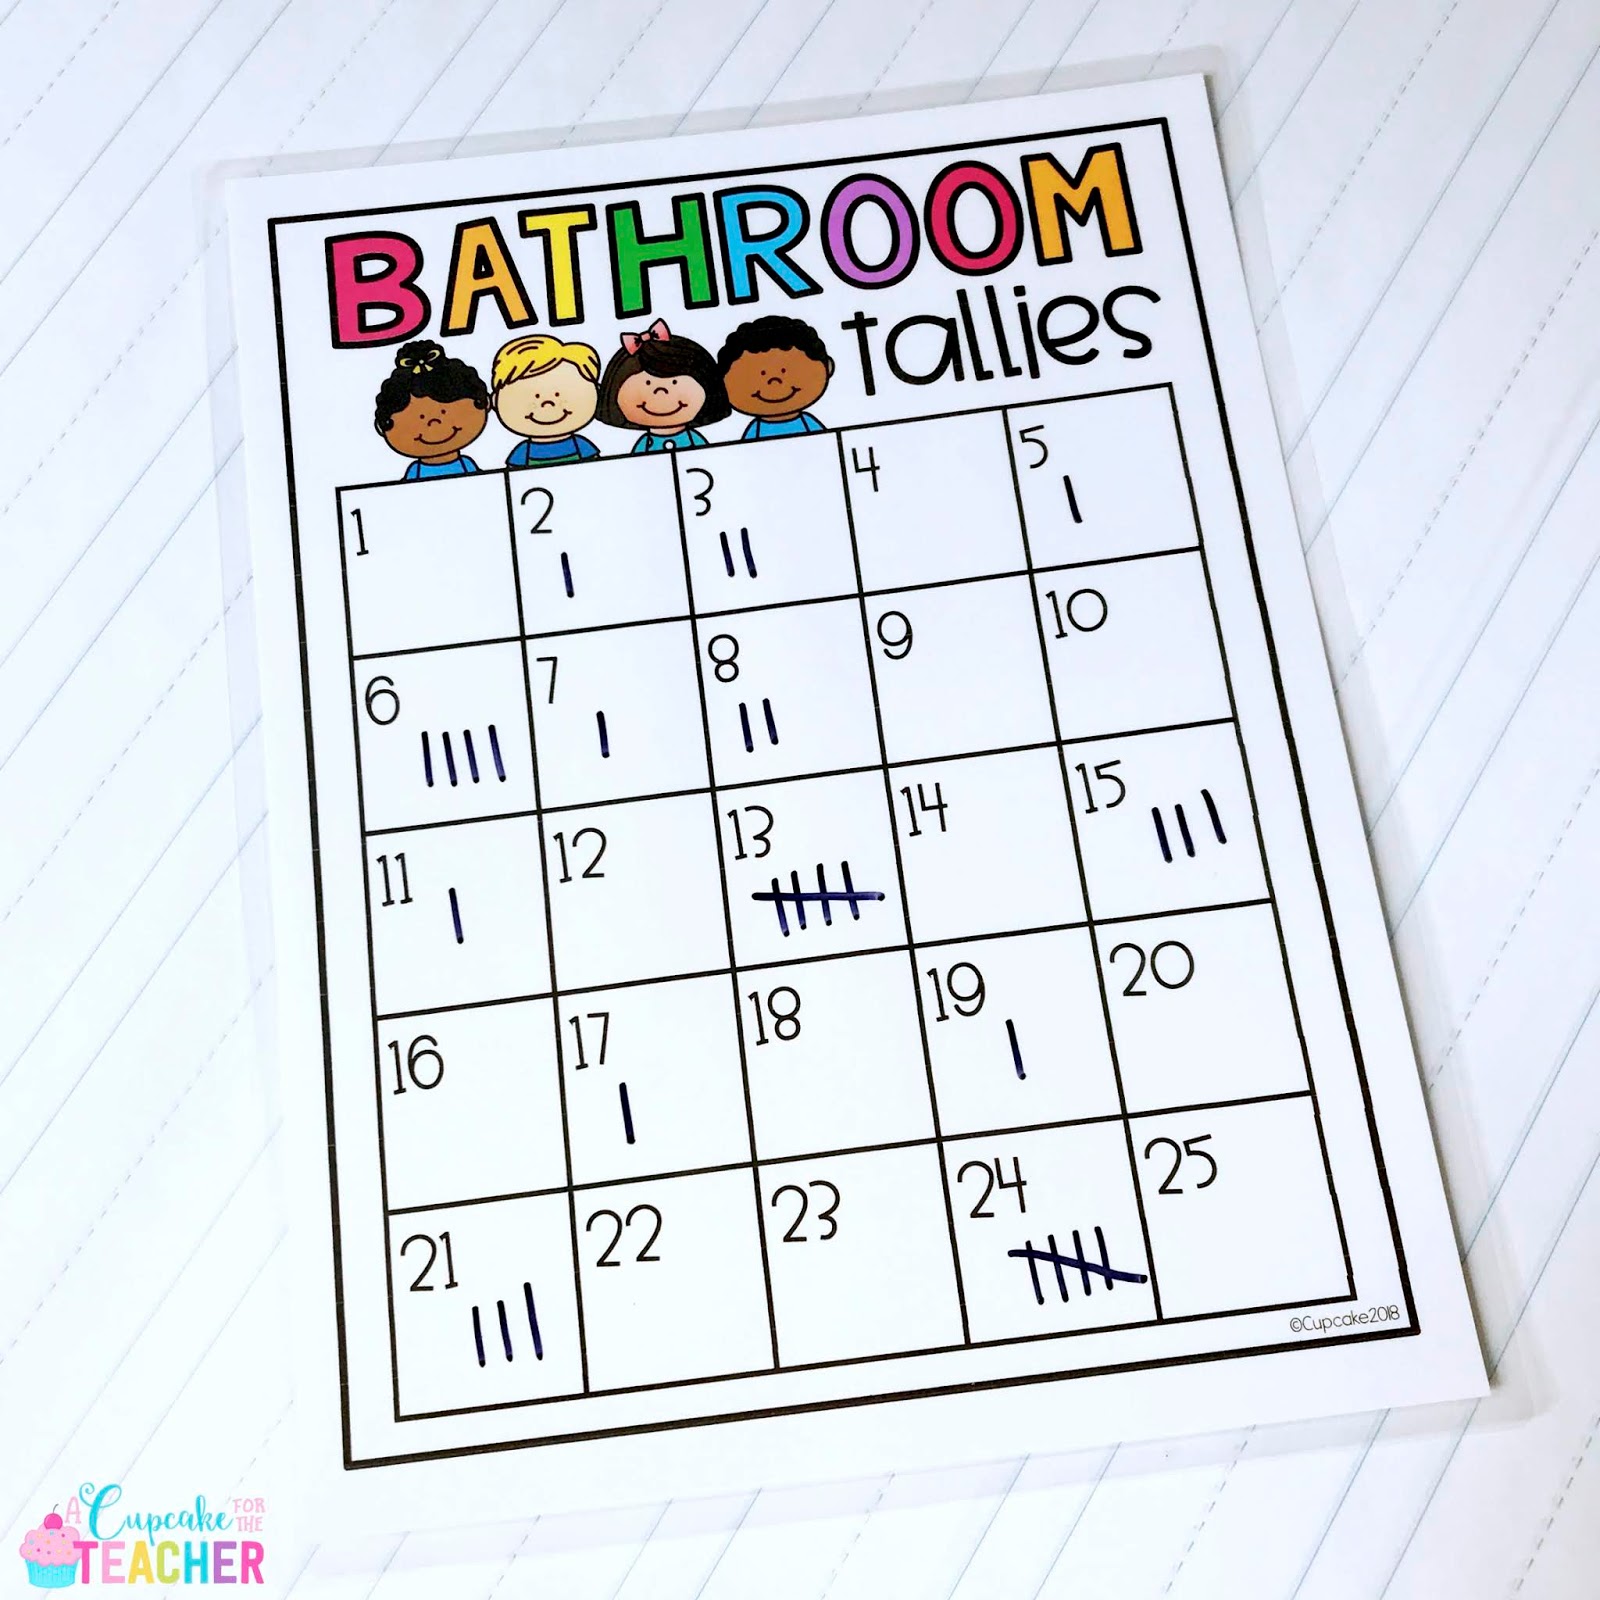 Use these bathroom trip tally charts from my Bathroom Rules & Management Kit!